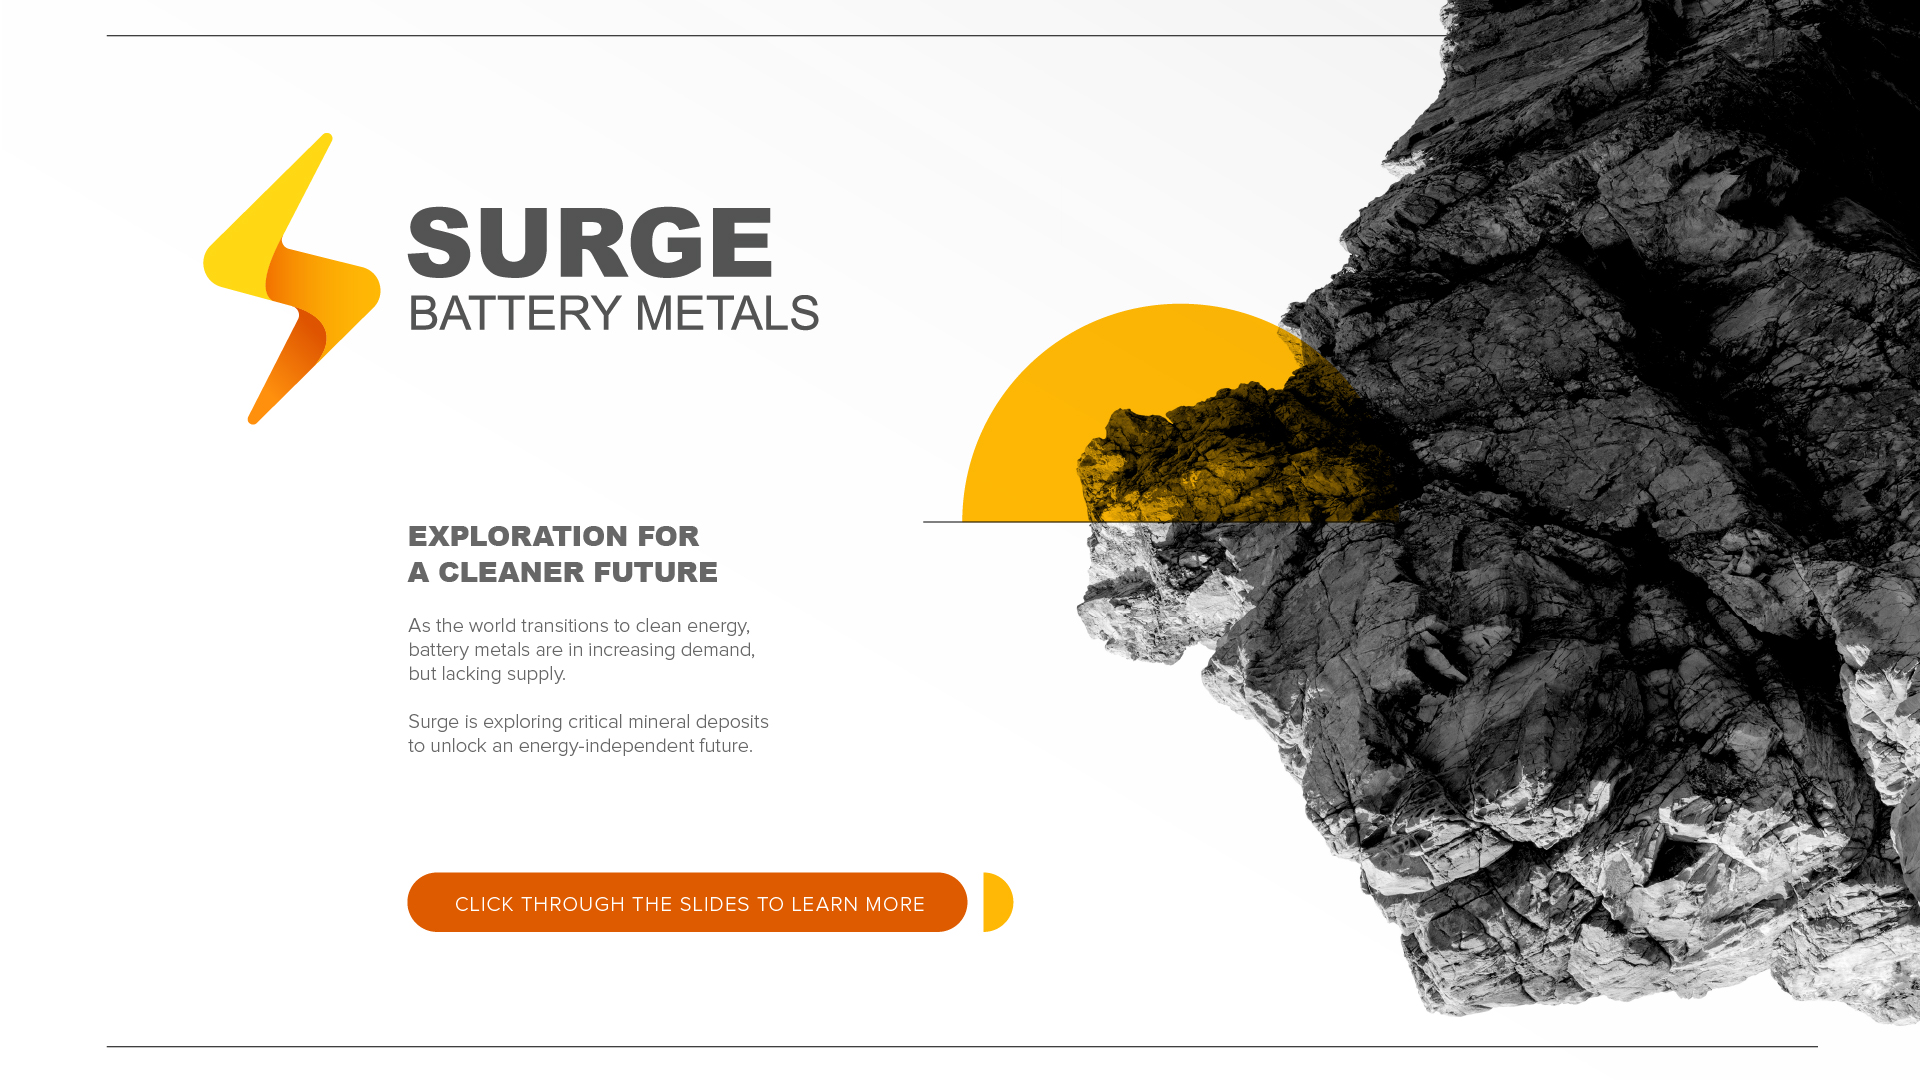 Surge Battery Metals slide introducing the company logo and their focus in exploring critical mineral deposits to help the world's transition to clean energy.